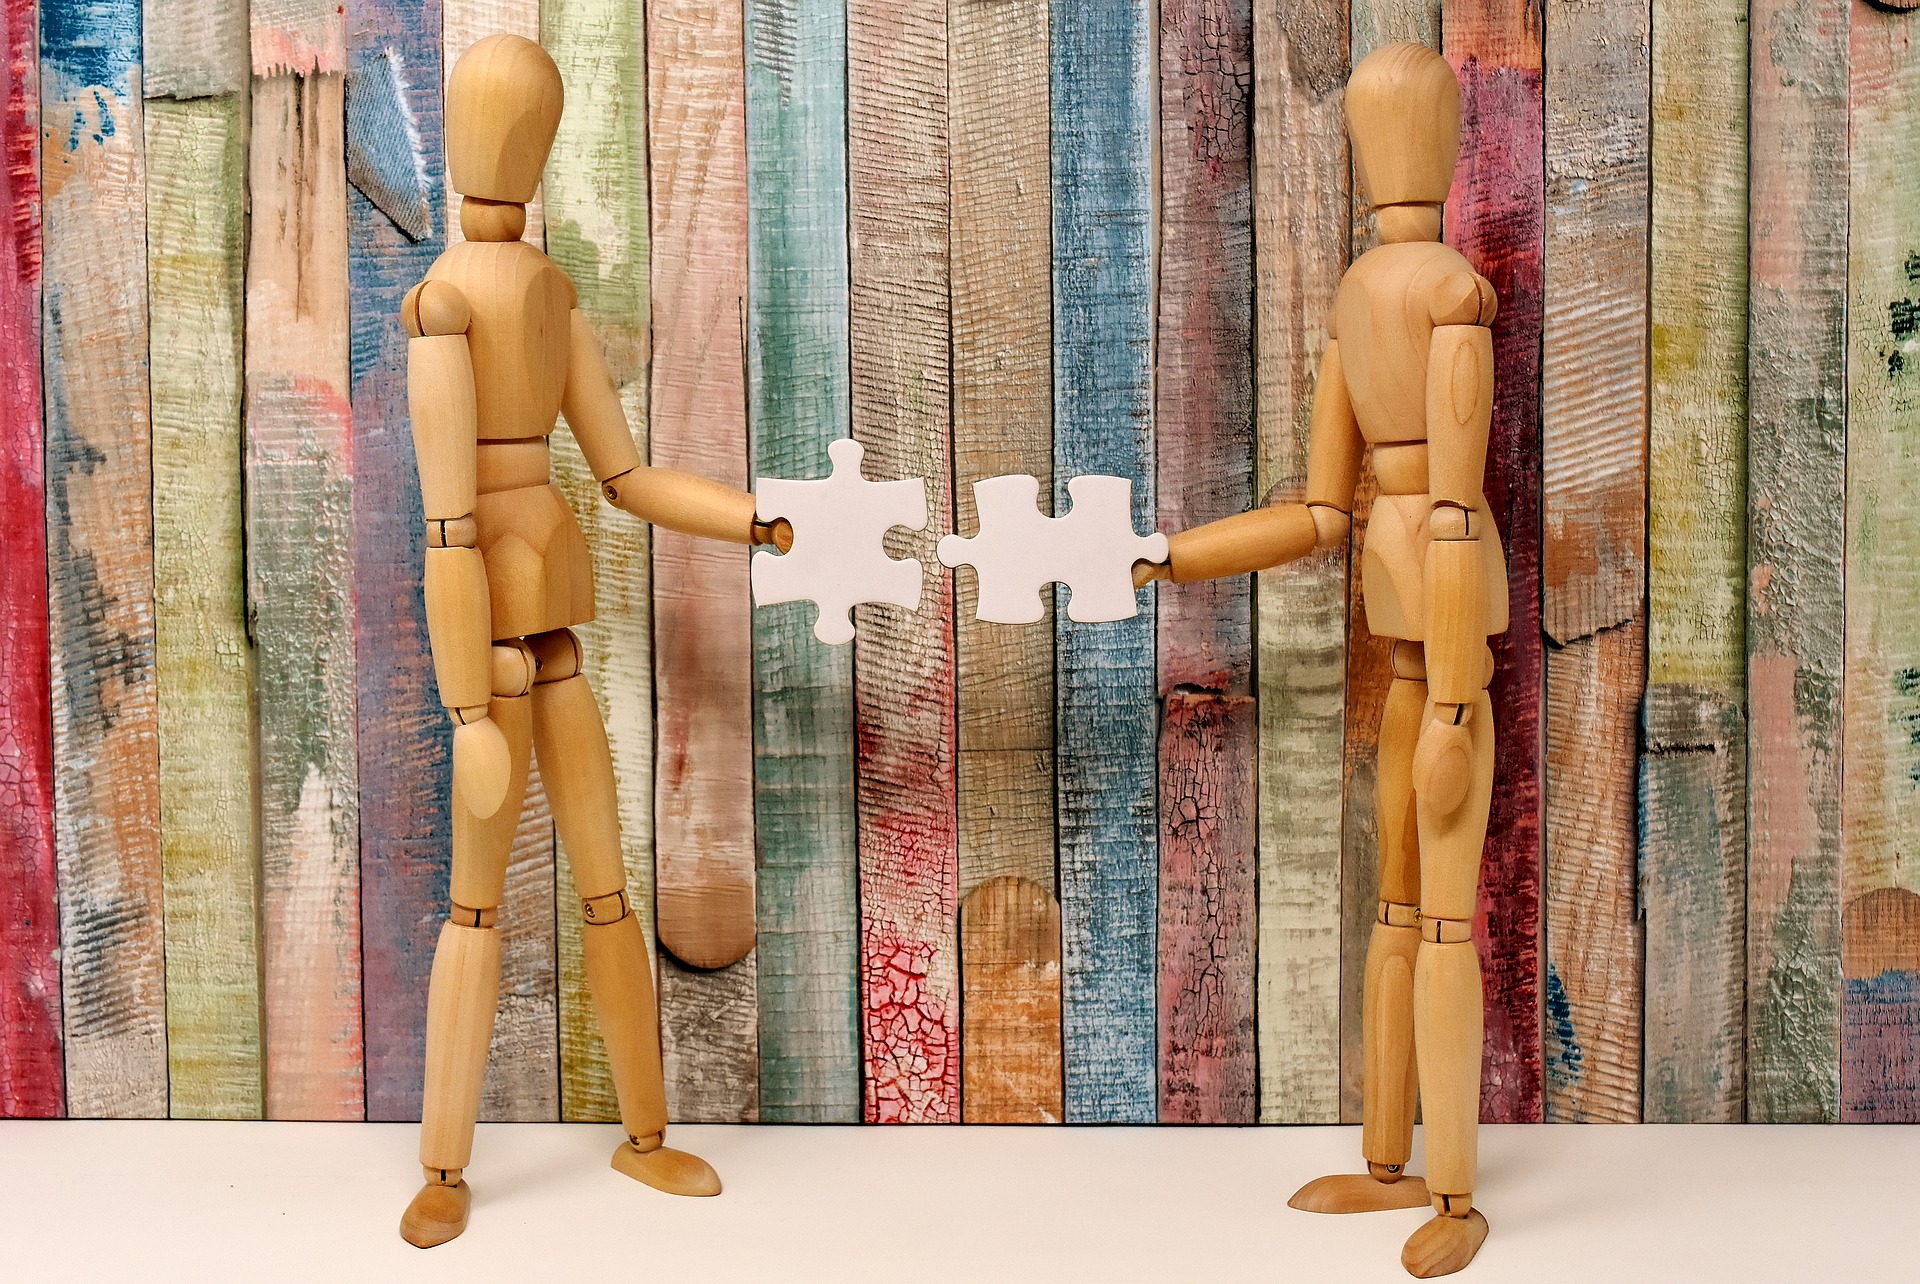 Two wooden drawing models standing in front of coloured panel fencing made of paddle pop sticks each holdig a piece of a puzzle and coming together